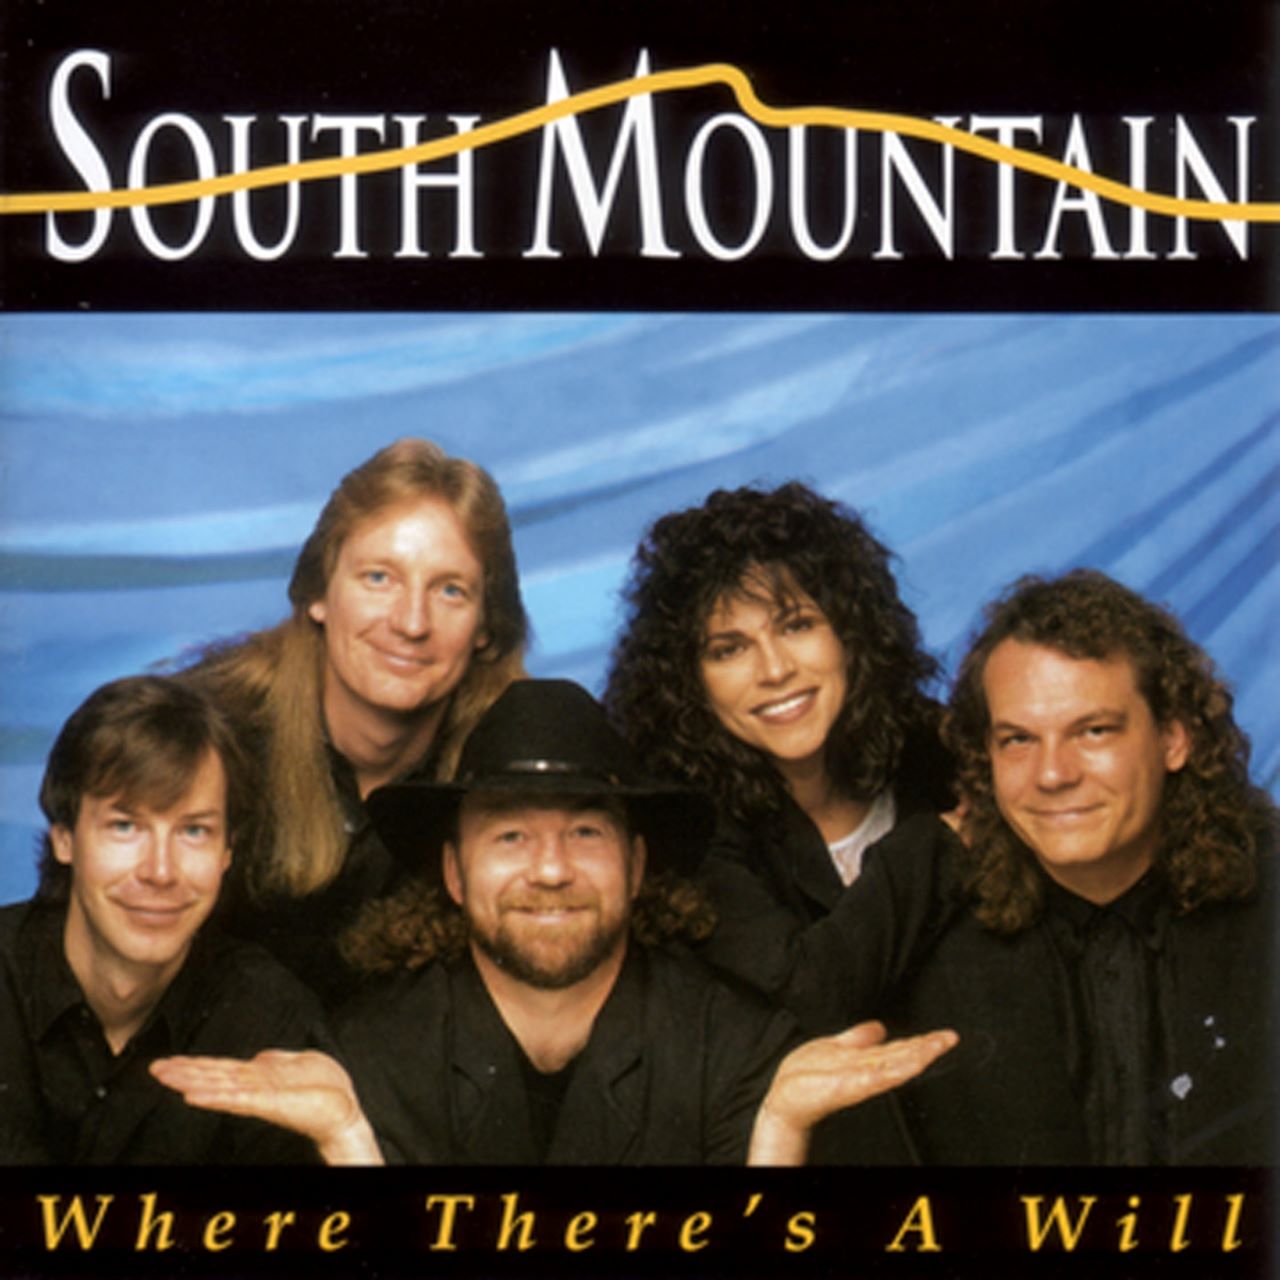 South Mountain - Where There's A Will cover album